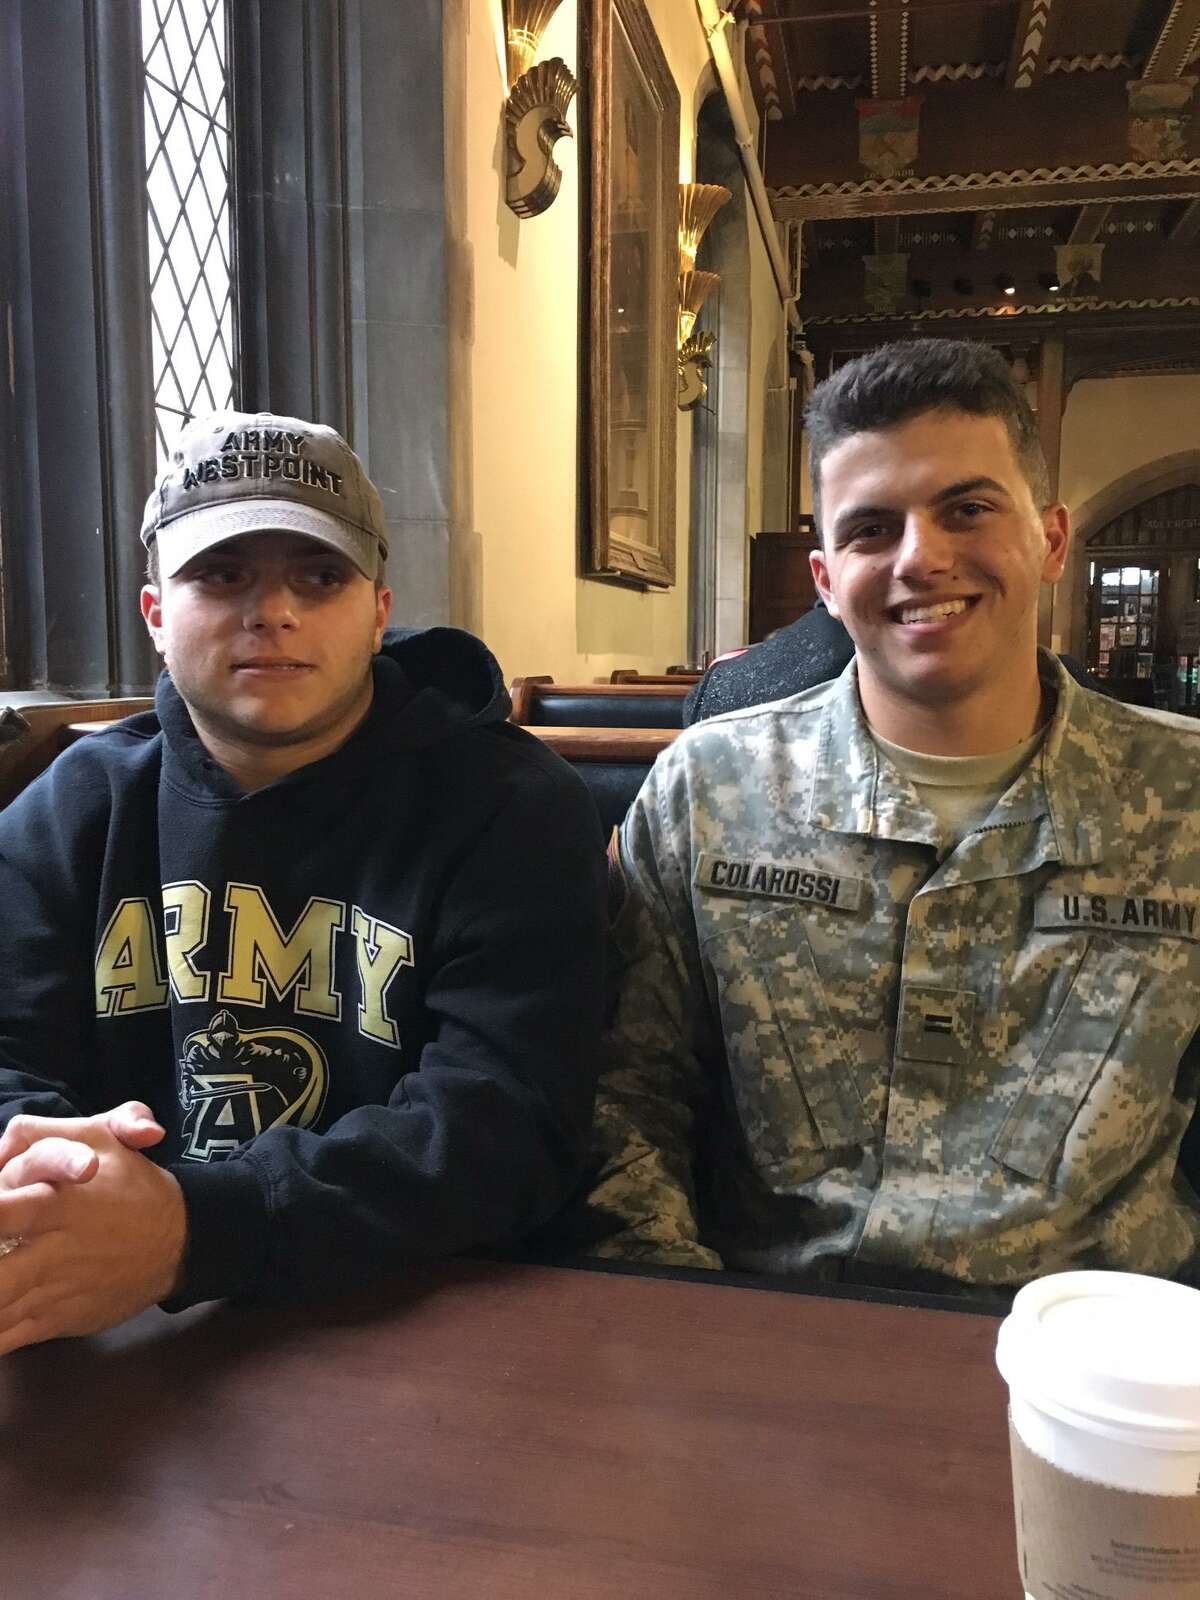 Stamford resident Aristotle Colarossi, left, is heading for West Point Military Academy and will report to the school on July 3. Here, Colarossi is pictured with his older brother, Dominic, on the right, a senior at the academy.